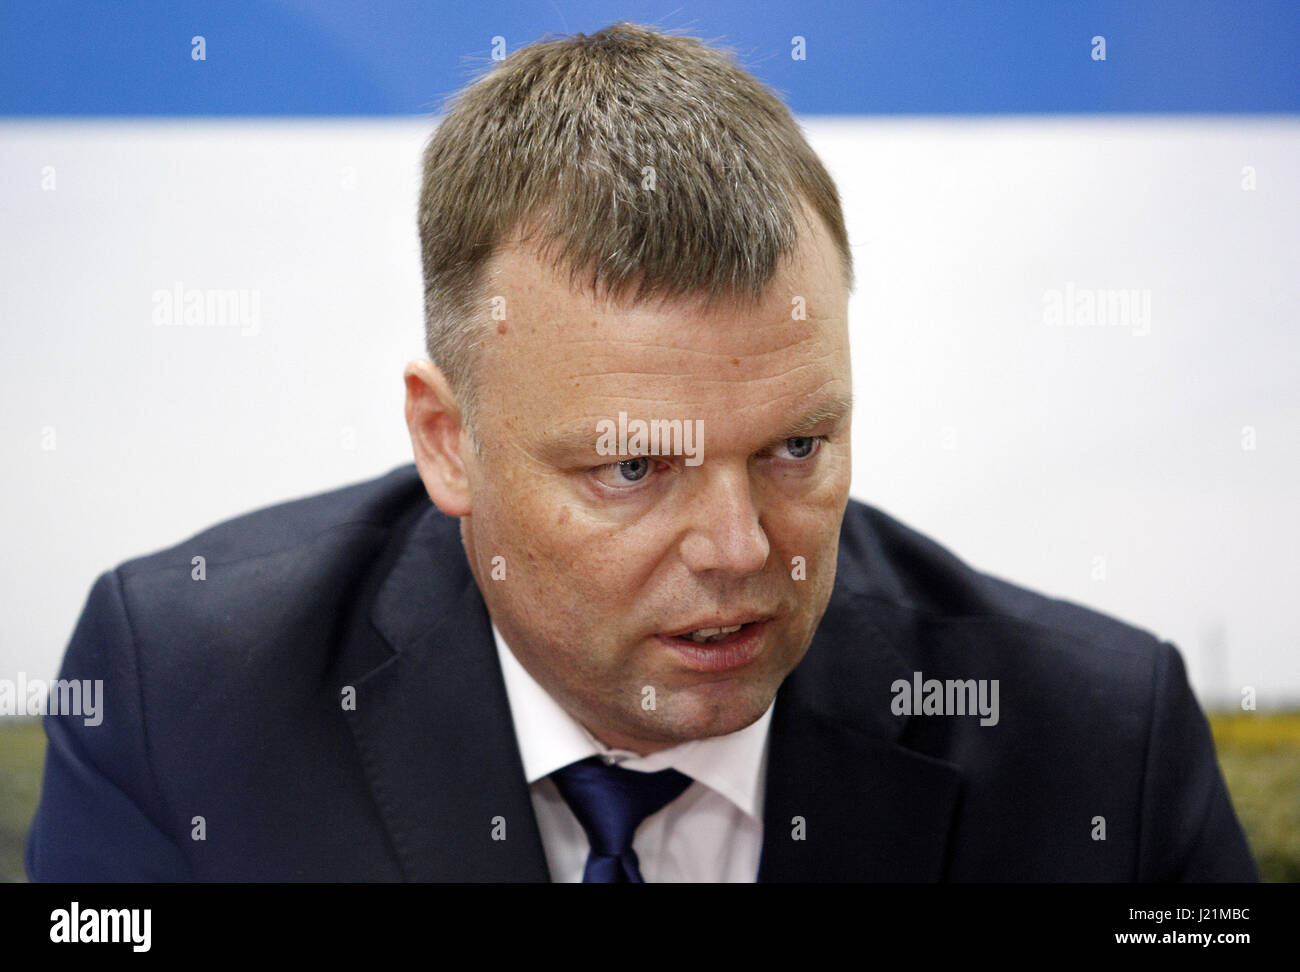 Kiev, Ukraine. 23rd Apr, 2017. The deputy head of the OSCE monitoring mission in Ukraine ALEXANDER HUG speaks during his a press-conference in Kiev, Ukraine, on 23 April 2017. The Organization for Security and Co-operation in Europe said Sunday one of its US monitors in Ukraine died, after a patrol vehicle hit a landmine in the Russian-backed separatist East. It marked the first loss for the security body's Special Monitoring Mission (SMM) since Europe's only war broke out about three years ago. Credit: Serg Glovny/ZUMA Wire/Alamy Live News Stock Photo